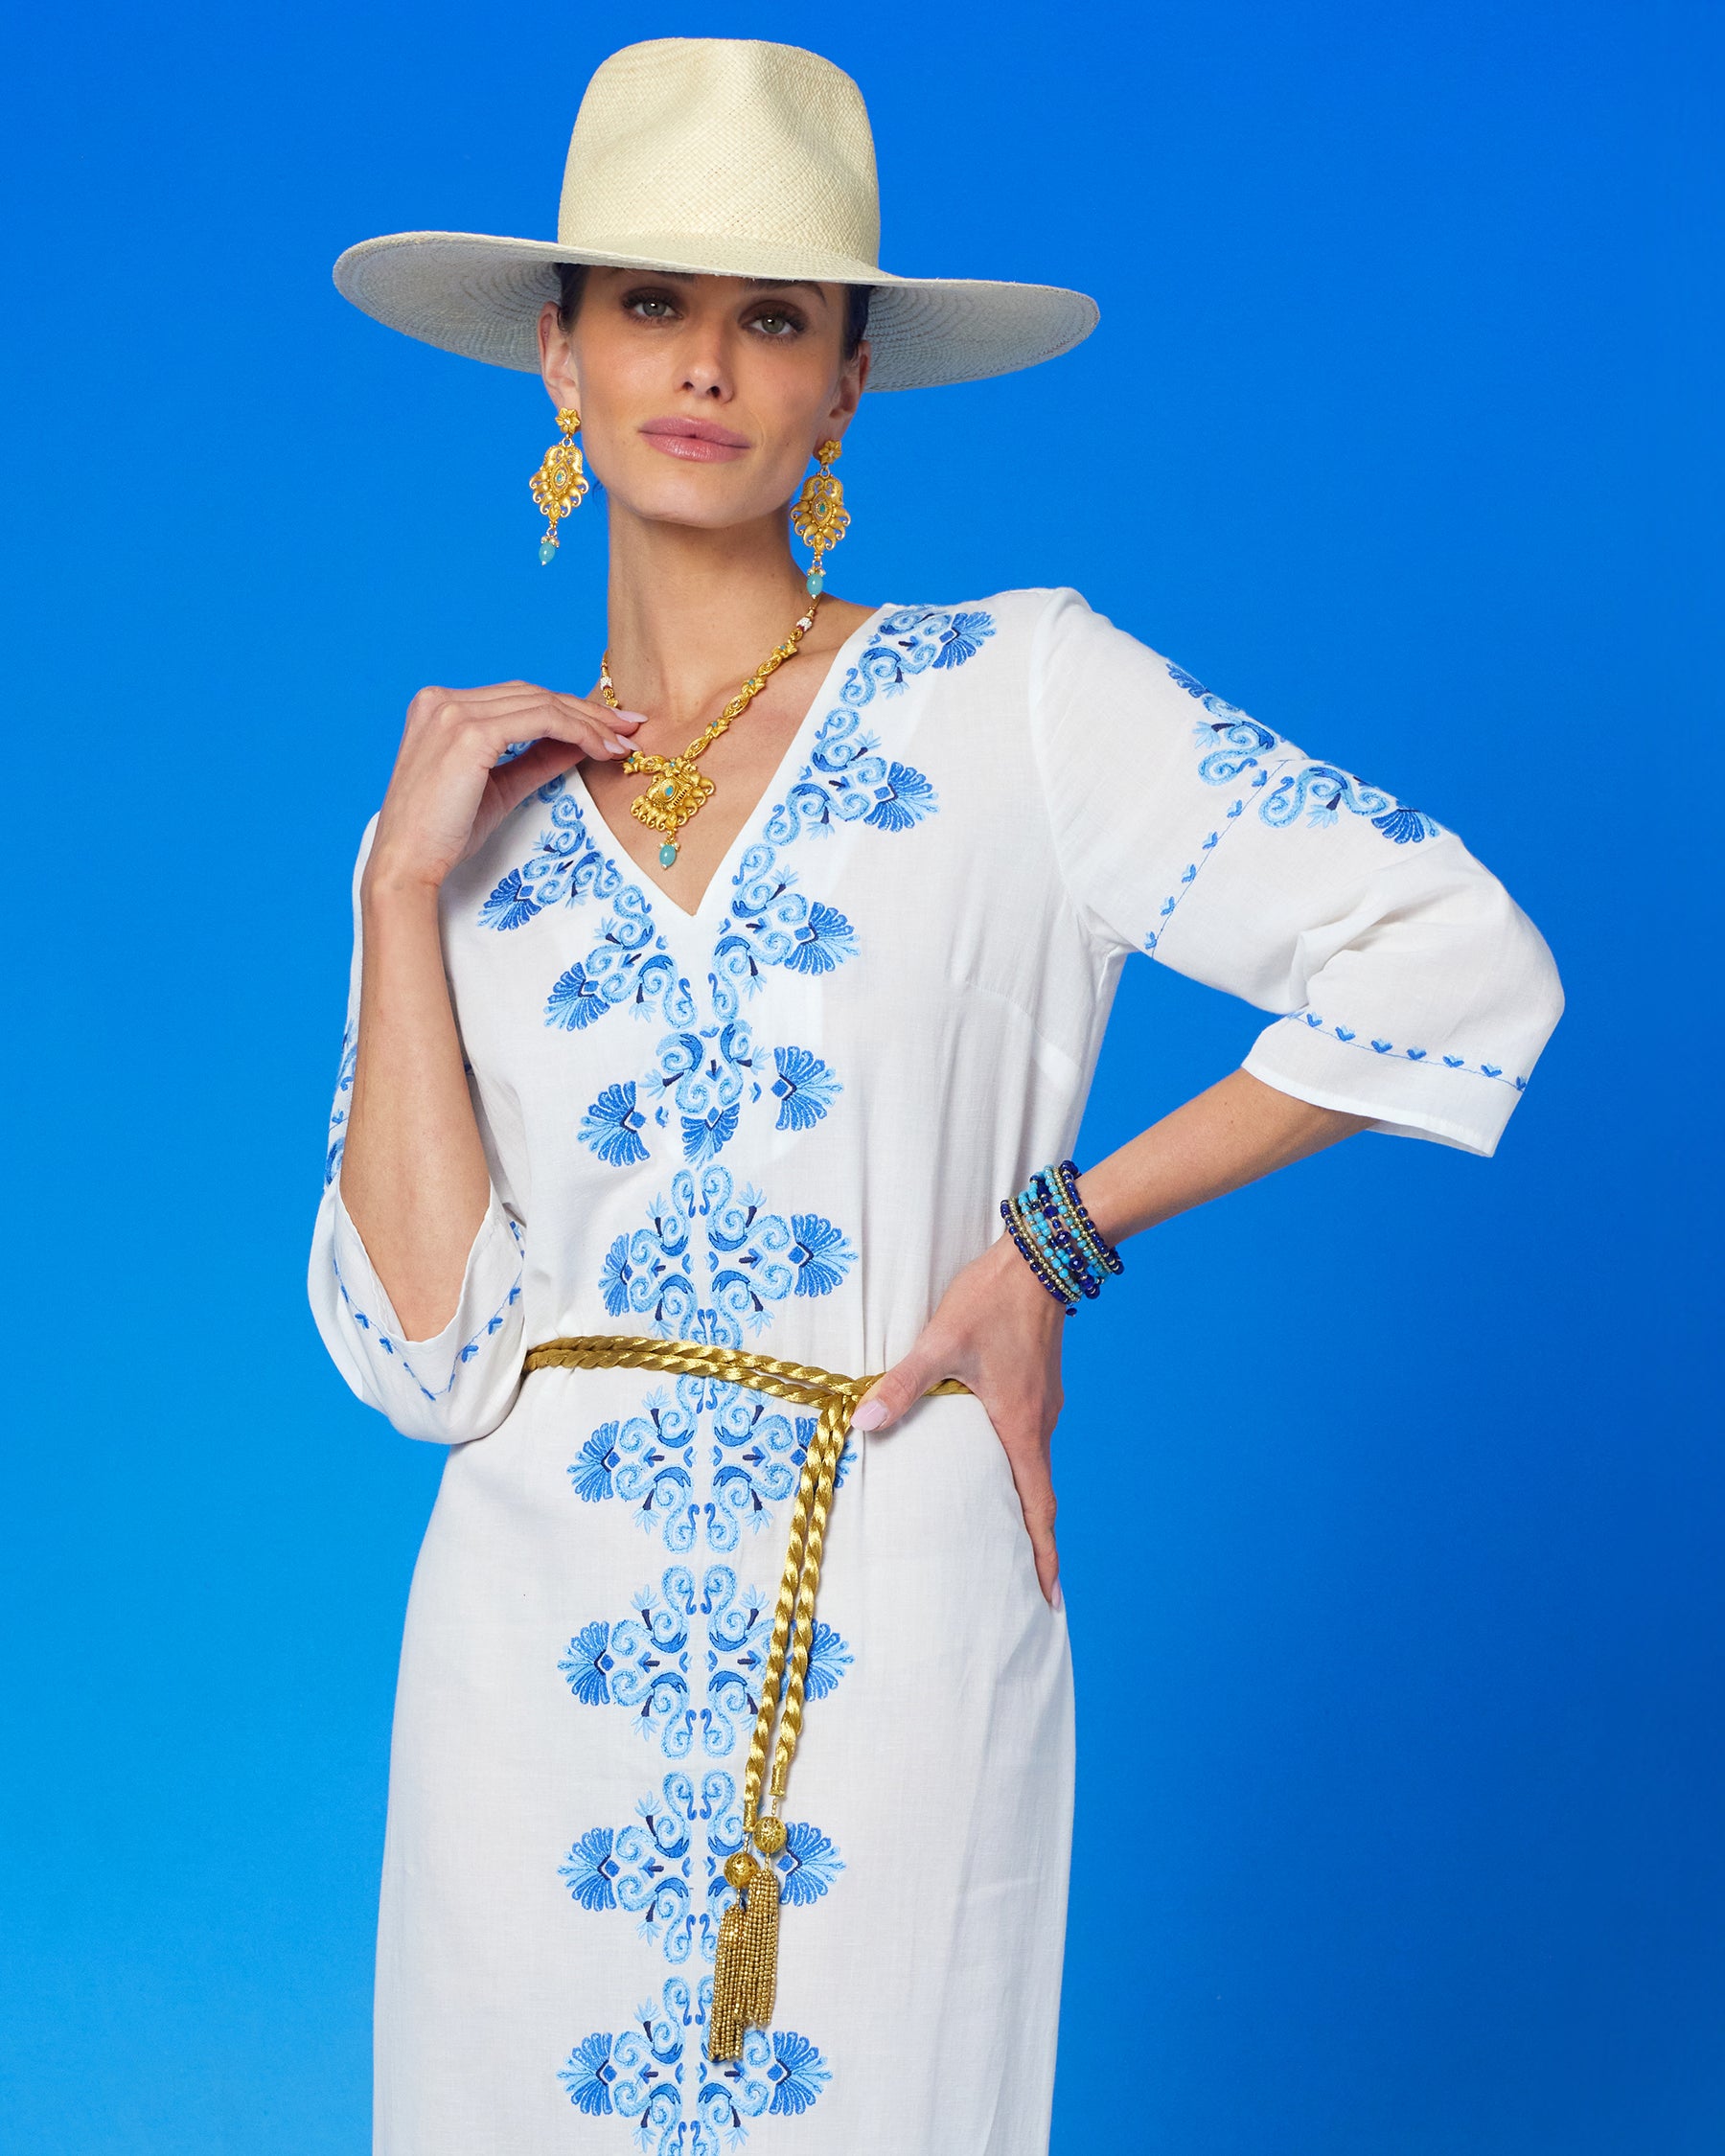 Artemis Rope Belt in Gold Beading worn with the Menorca Long Kaftan Dress and Grecian Motif Embroidery